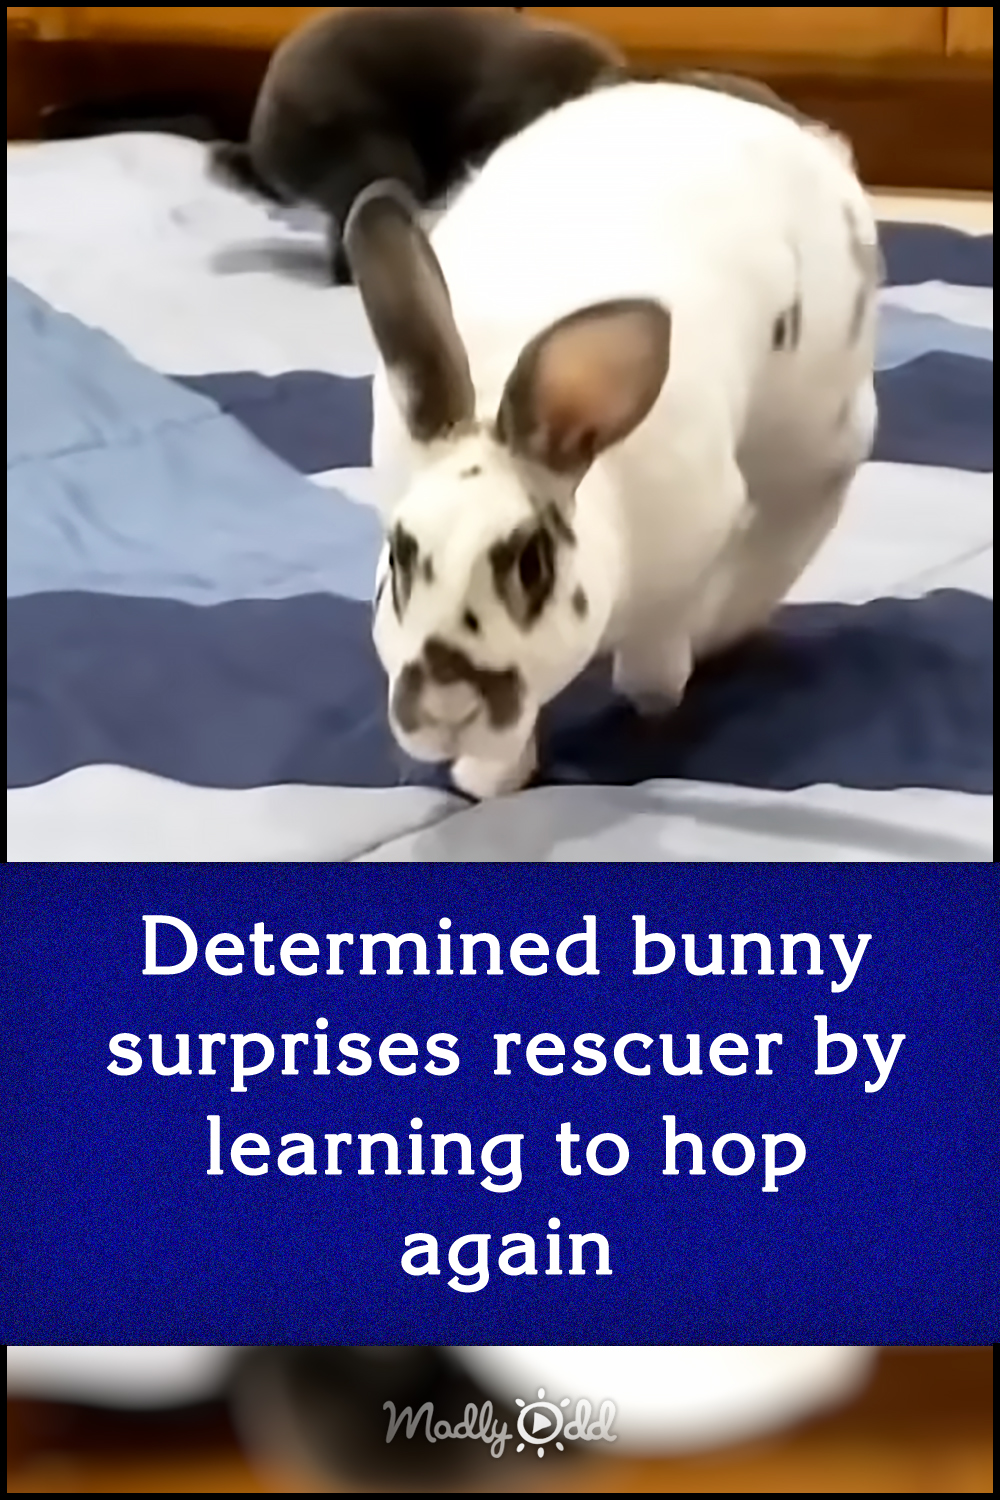 Determined bunny surprises rescuer by learning to hop again